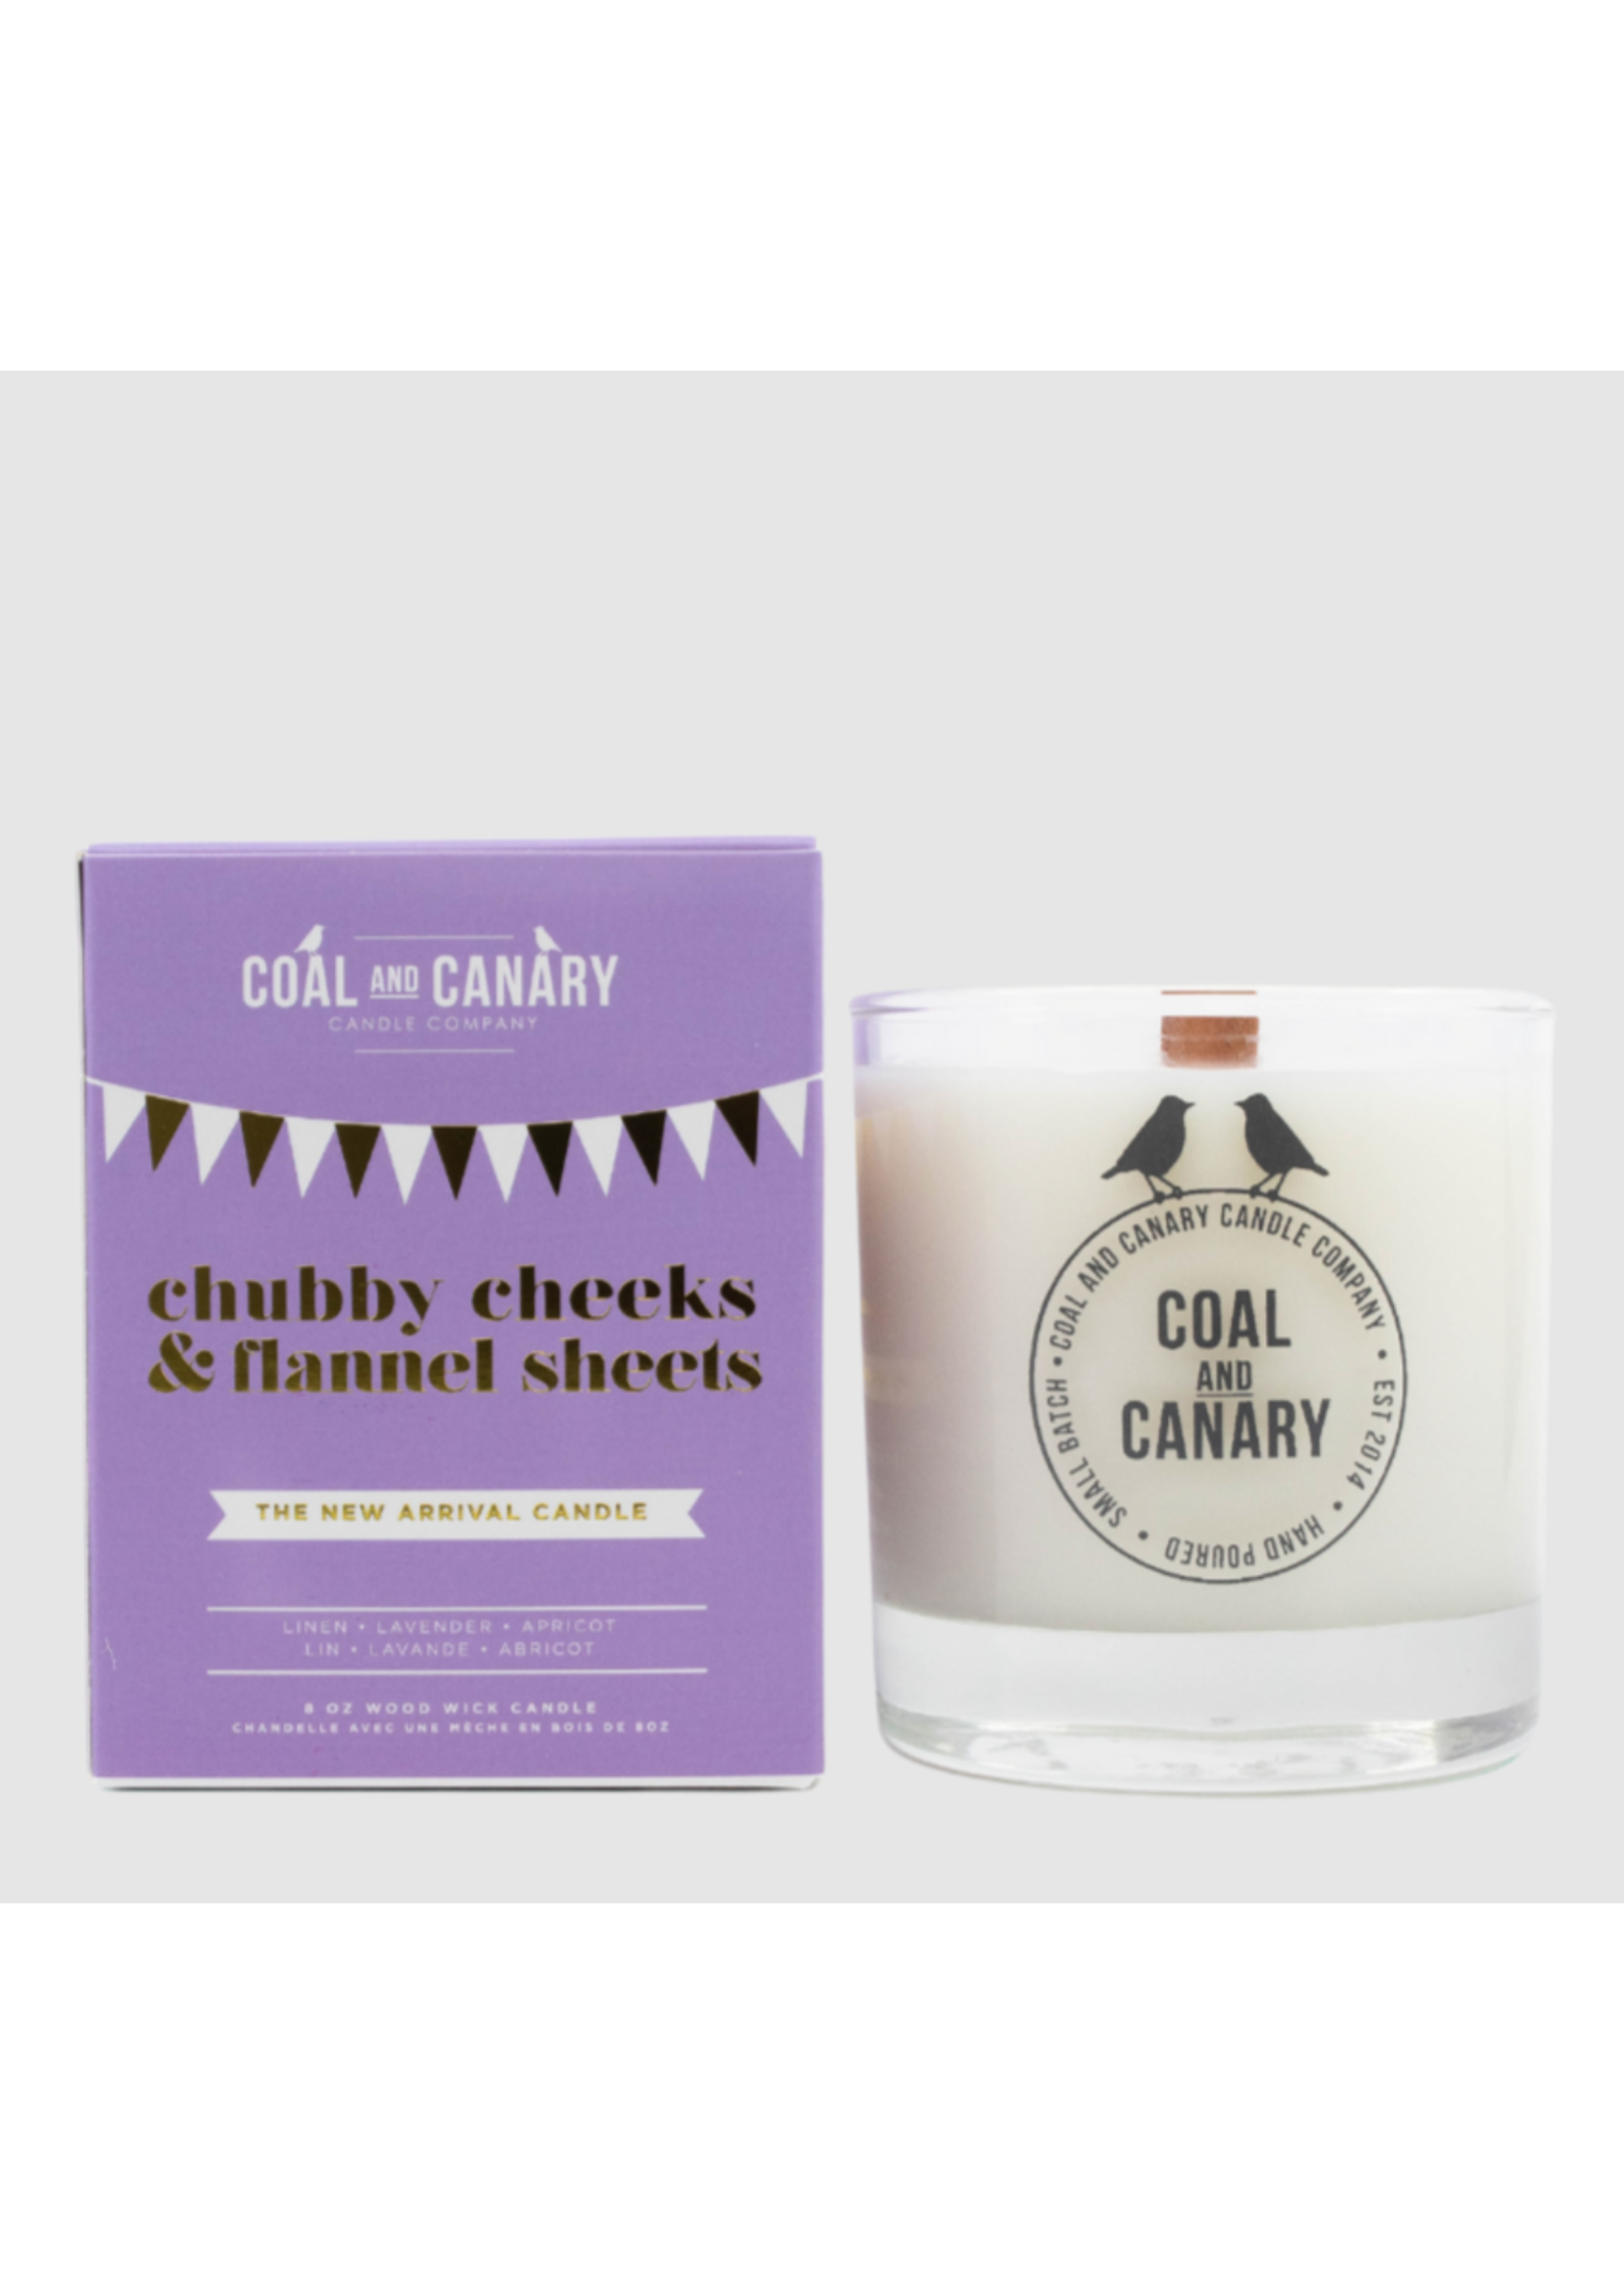 Coal and Canary Chubby Cheeks & Flannel Sheets